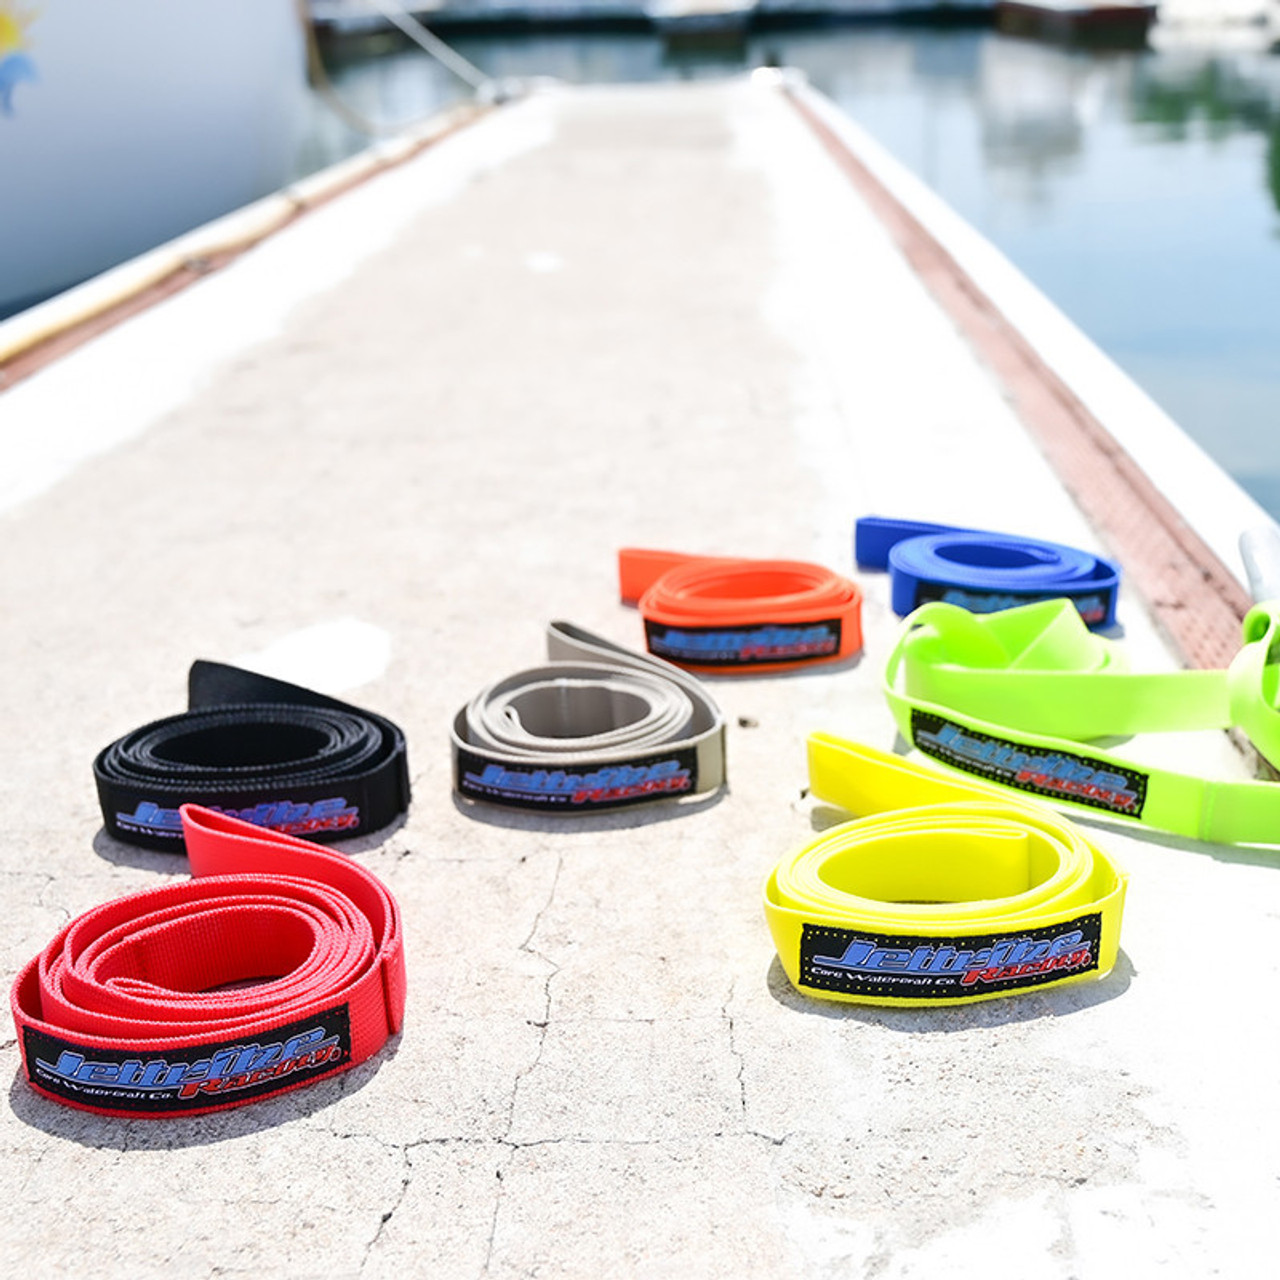 https://cdn11.bigcommerce.com/s-09242/images/stencil/1280x1280/products/1481/22002/jettribe-pwc-dock-line-or-2-piece-set-or-pwc-jetski-ride-beach-accessories__60453.1667506094.jpg?c=2